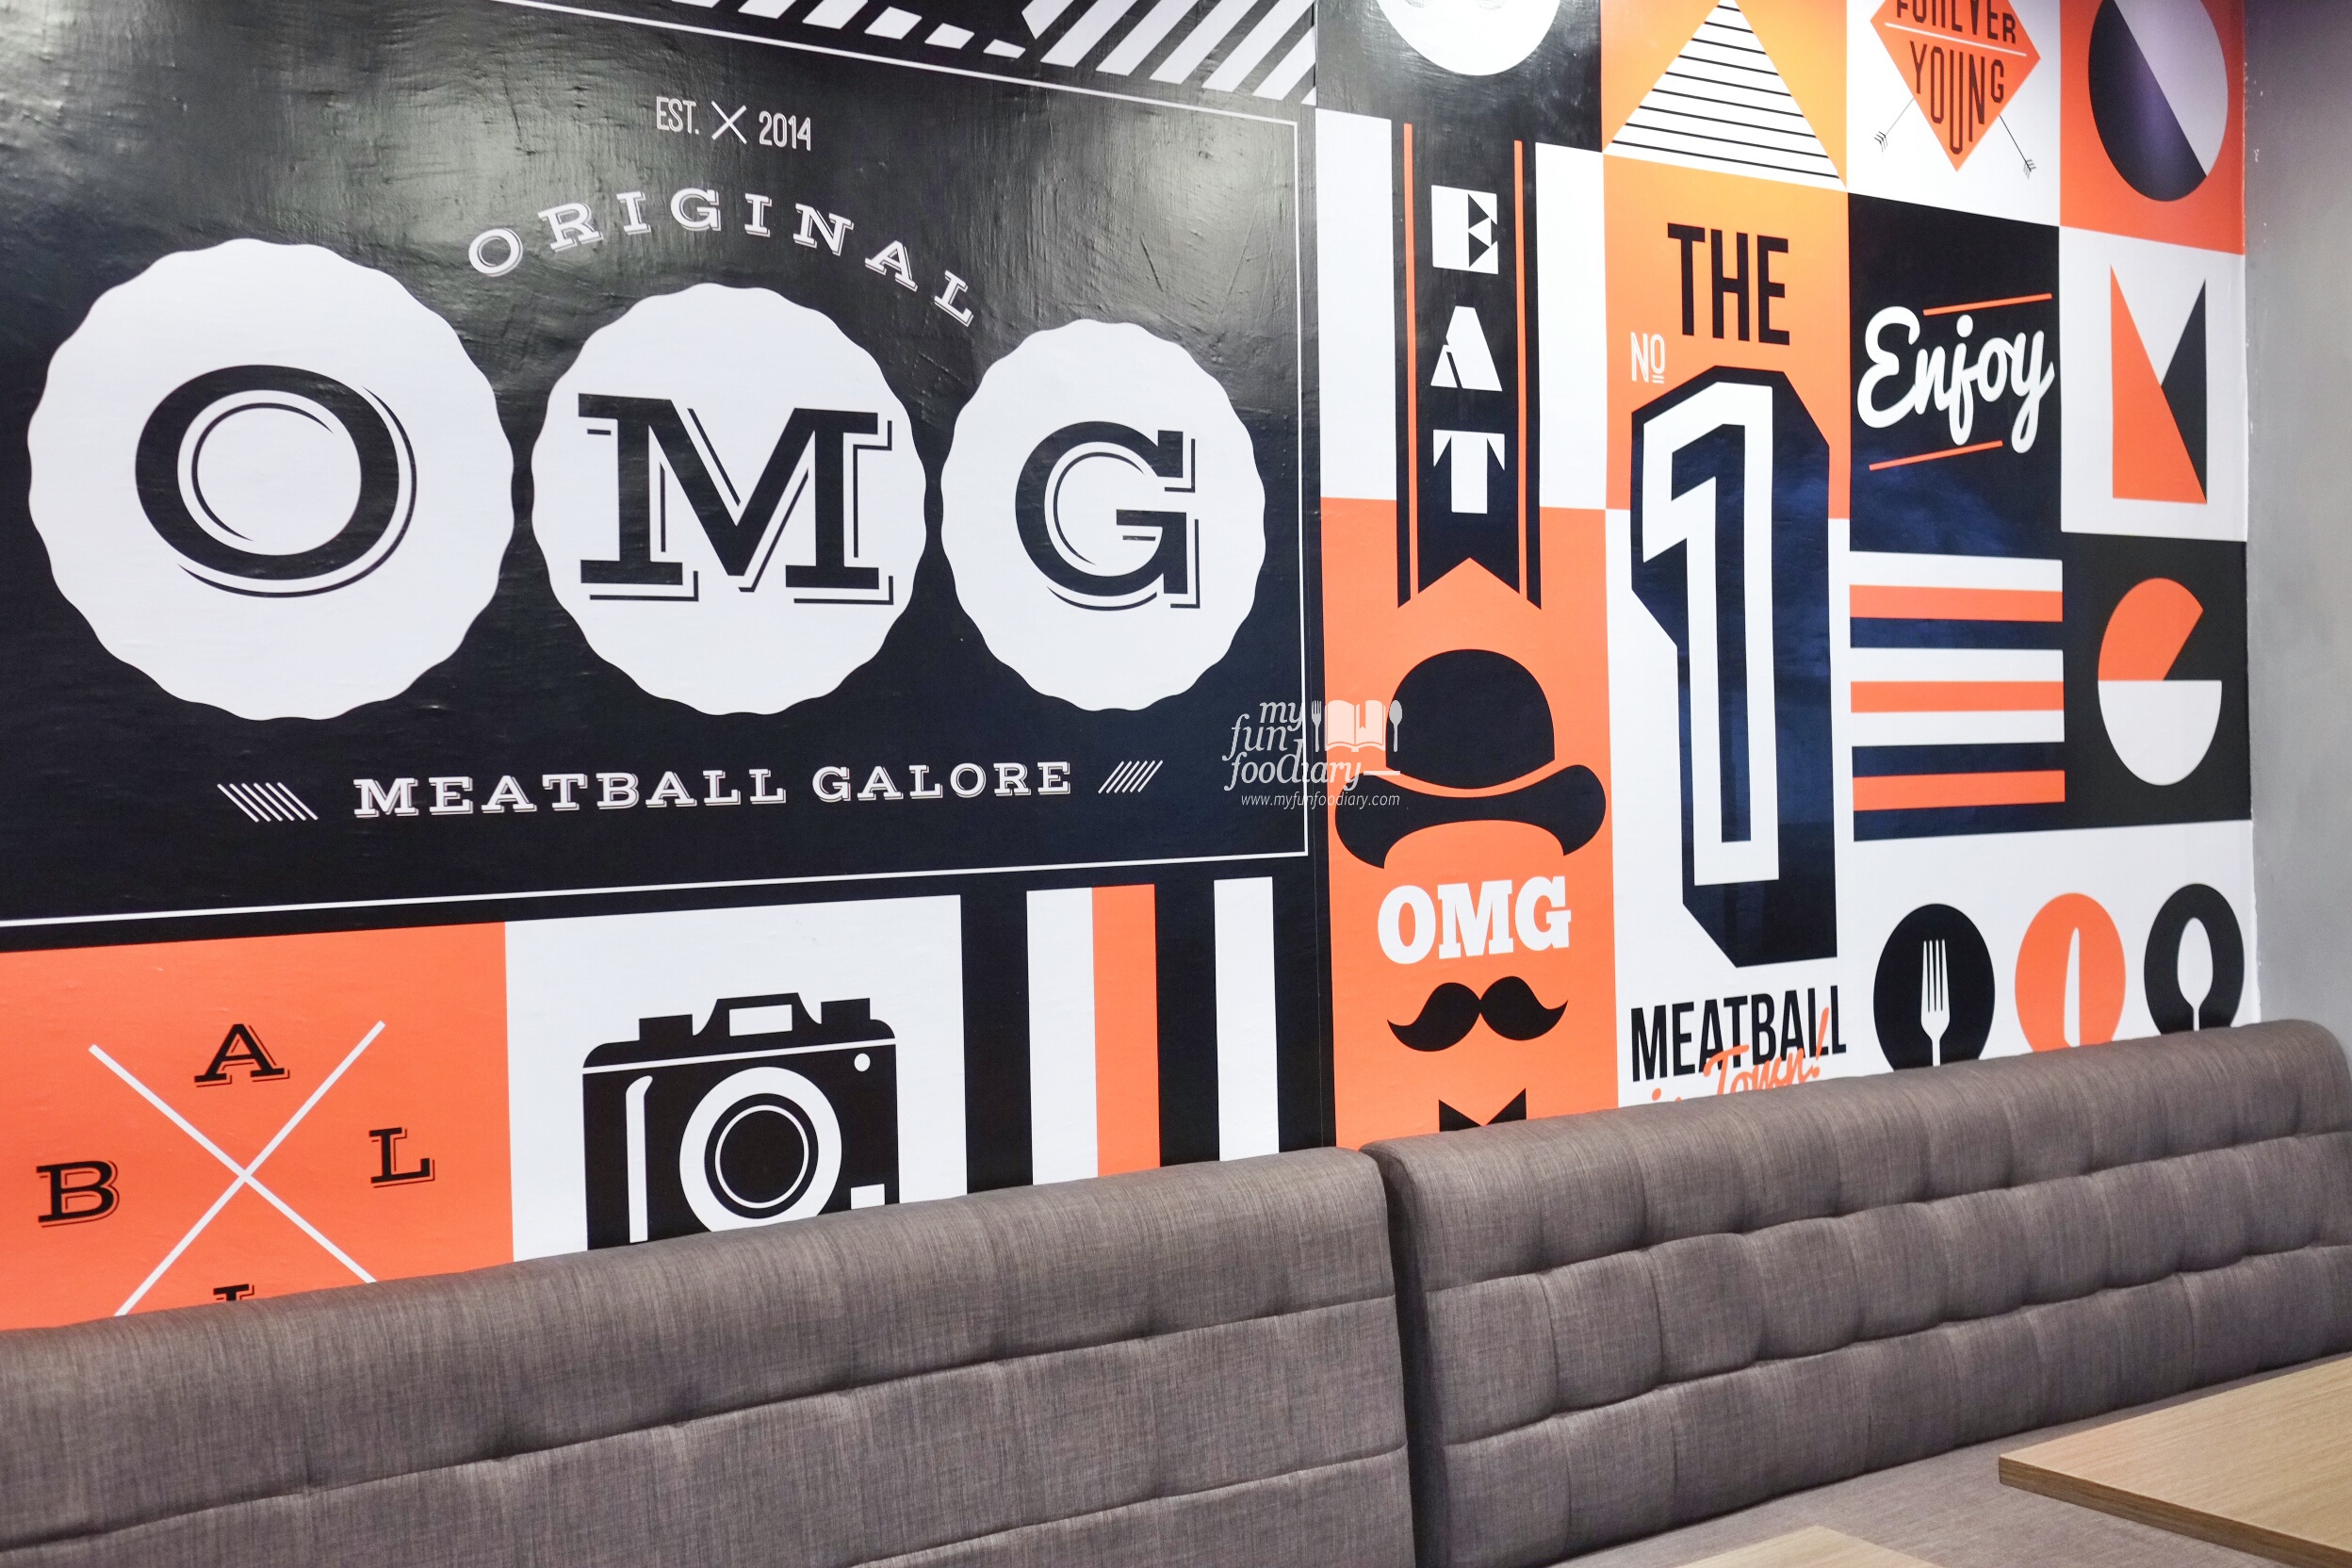 Sofa Area at OMG Meatballs by Myfunfoodiary